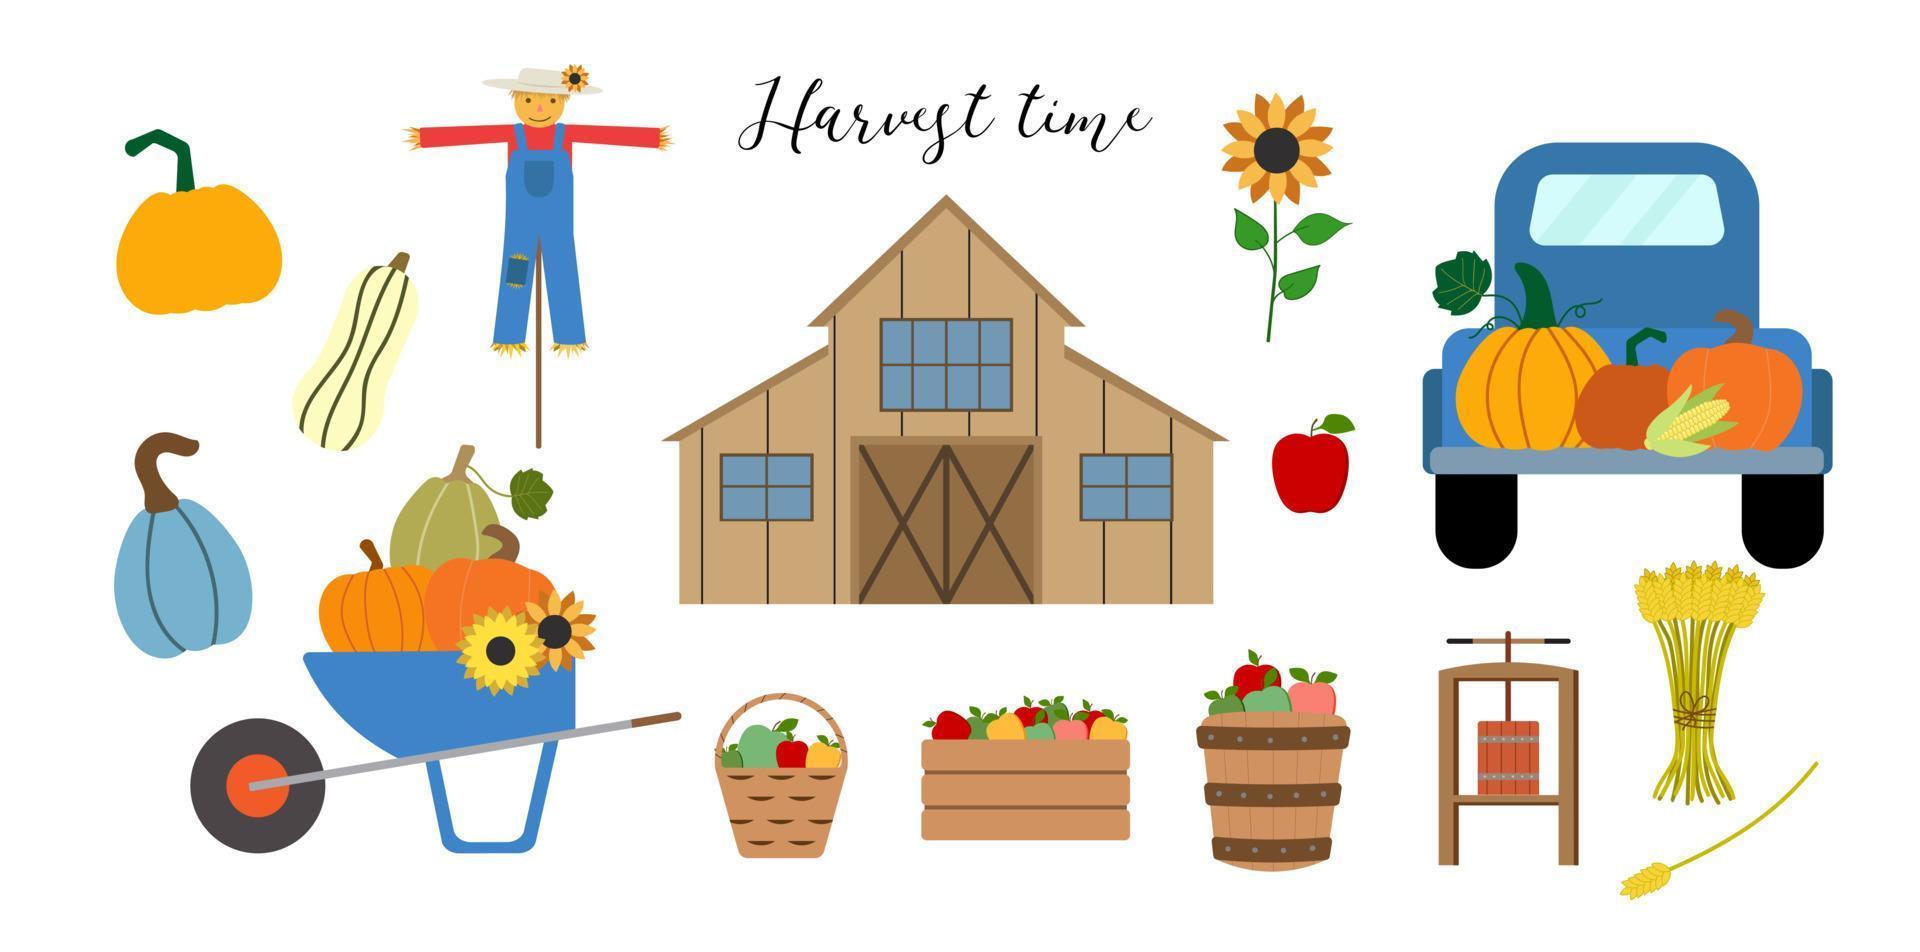 Autumn vector clipart with old wood barn, blue truck, scarecrow, wheelbarrow, pumpkins, apples in baskets and crate, cider press, sunflower isolated on white background.